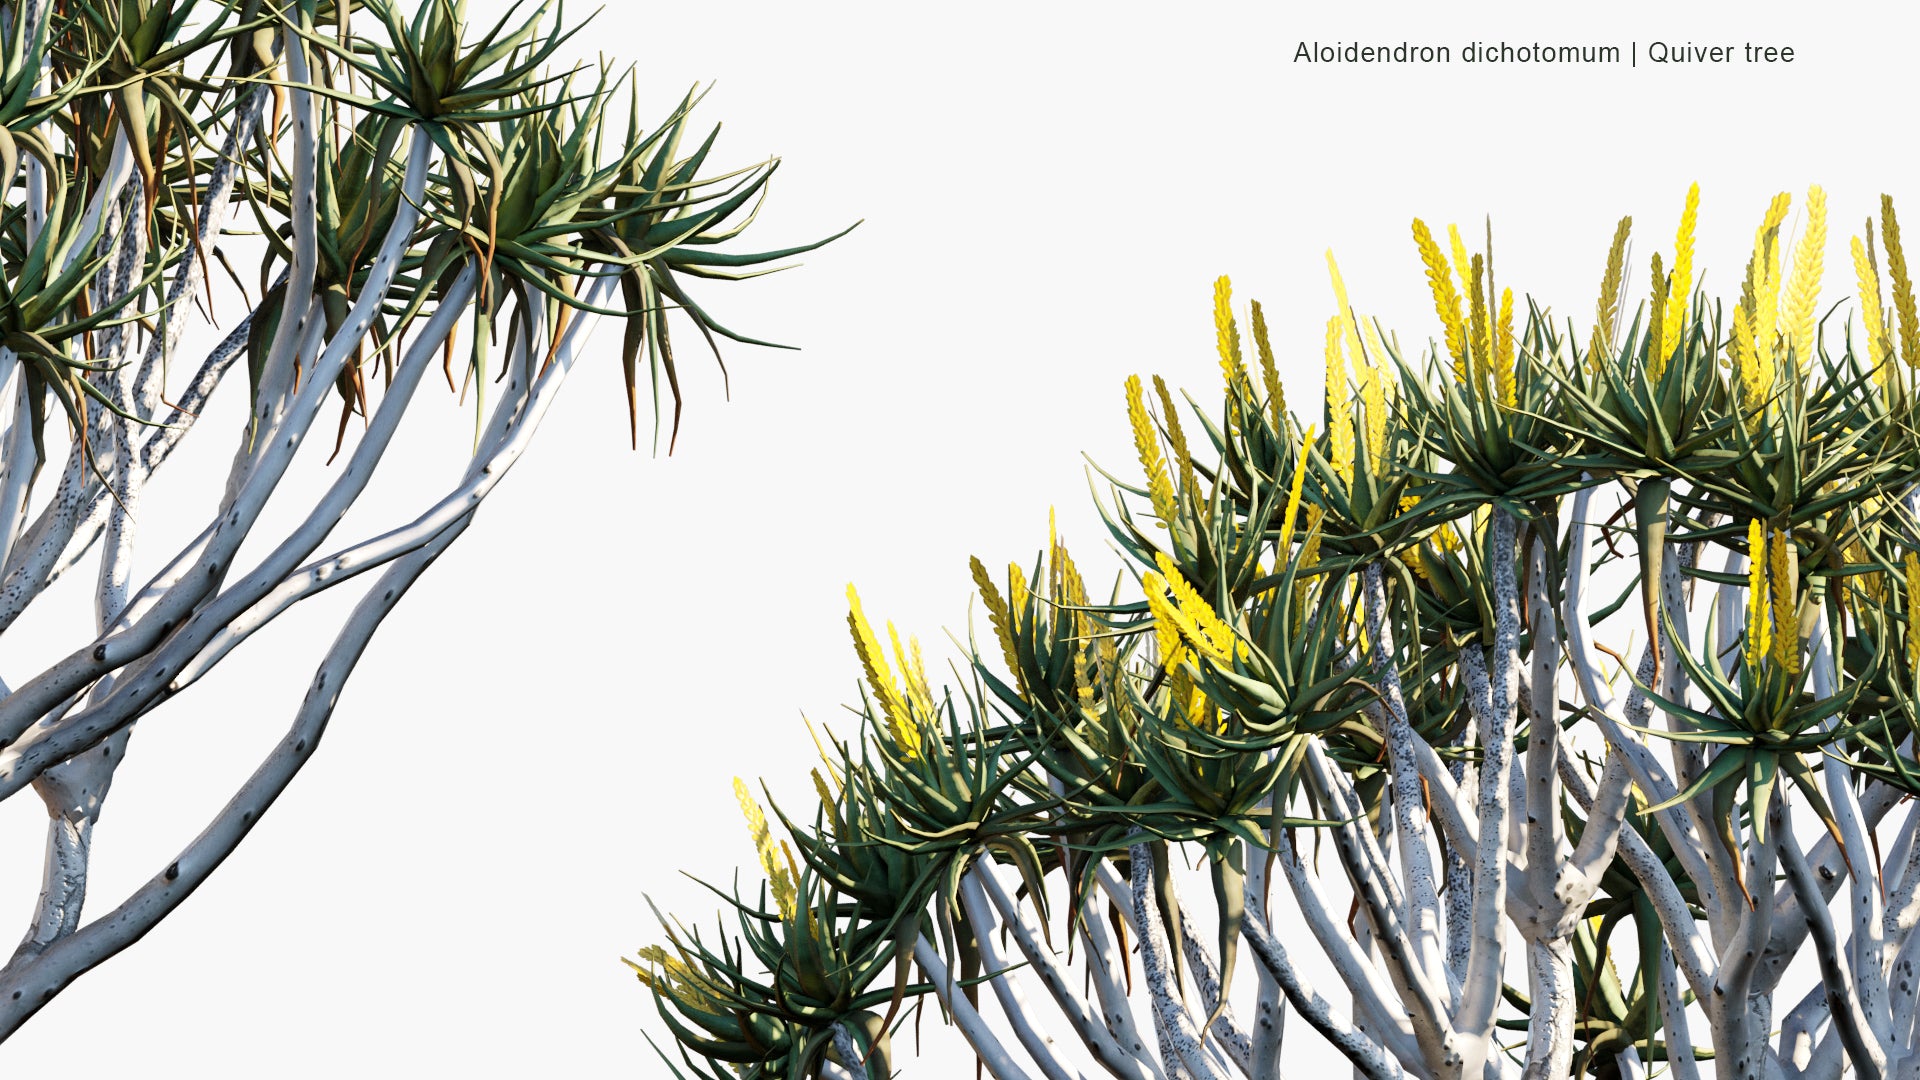 Low Poly Aloidendron Dichotomum - Aloe Dichotoma, Quiver Tree, Kokerboom (3D Model)